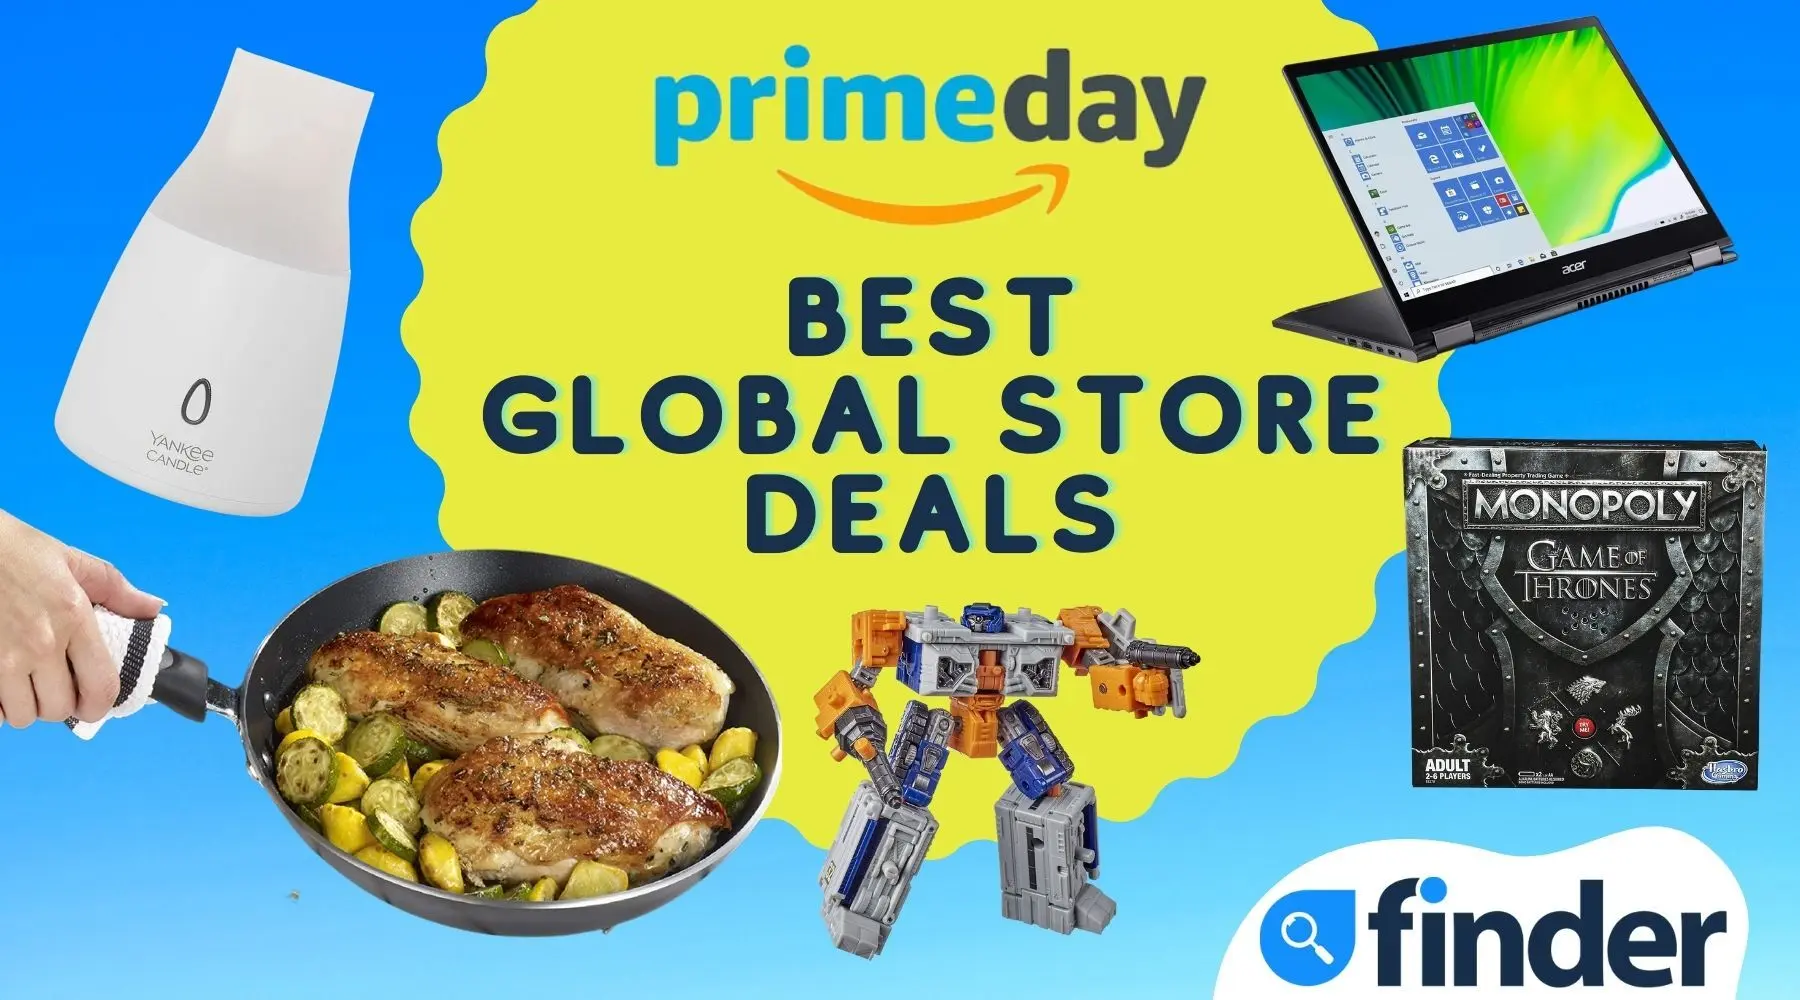 Amazon Prime Day Best global store deals to shop before time runs out